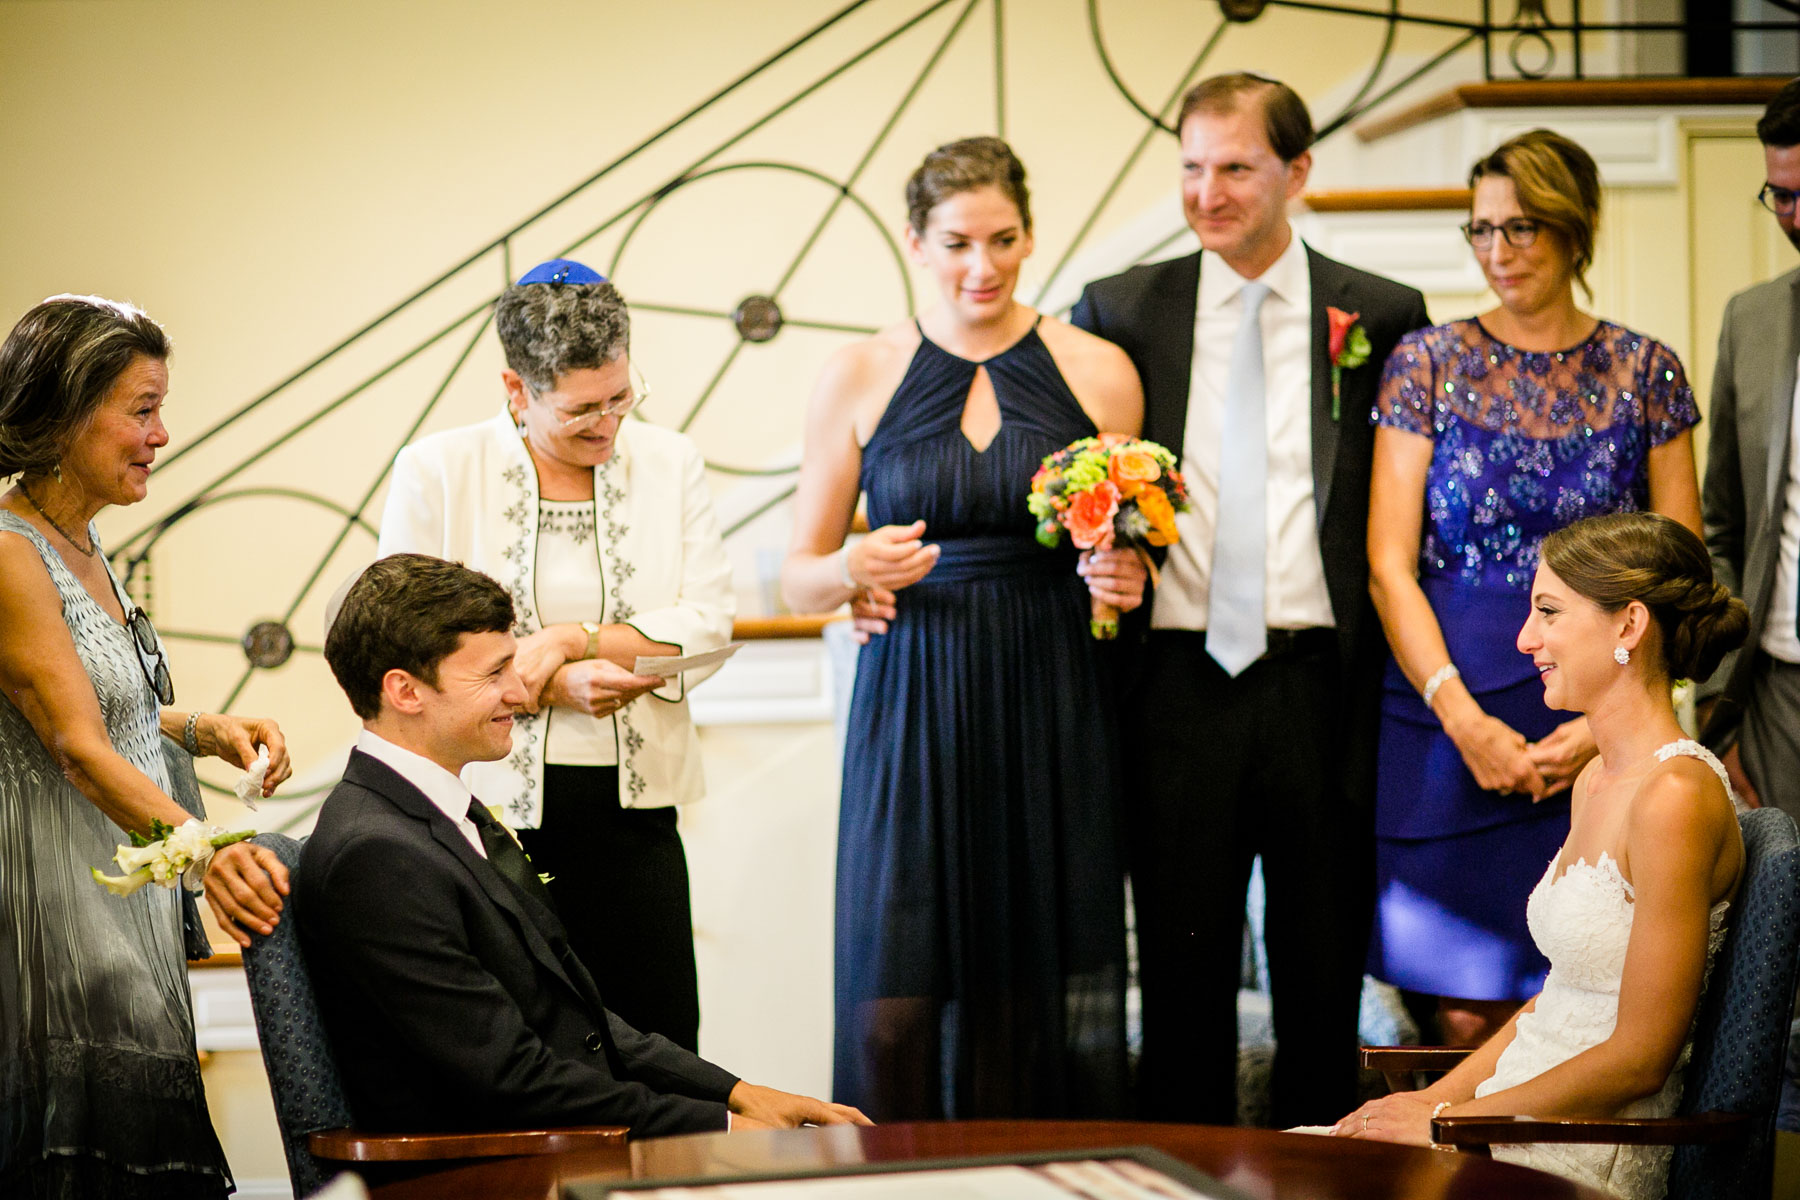 The_Connors_Center_Wedding_Dan_Aguirre_Photography_054